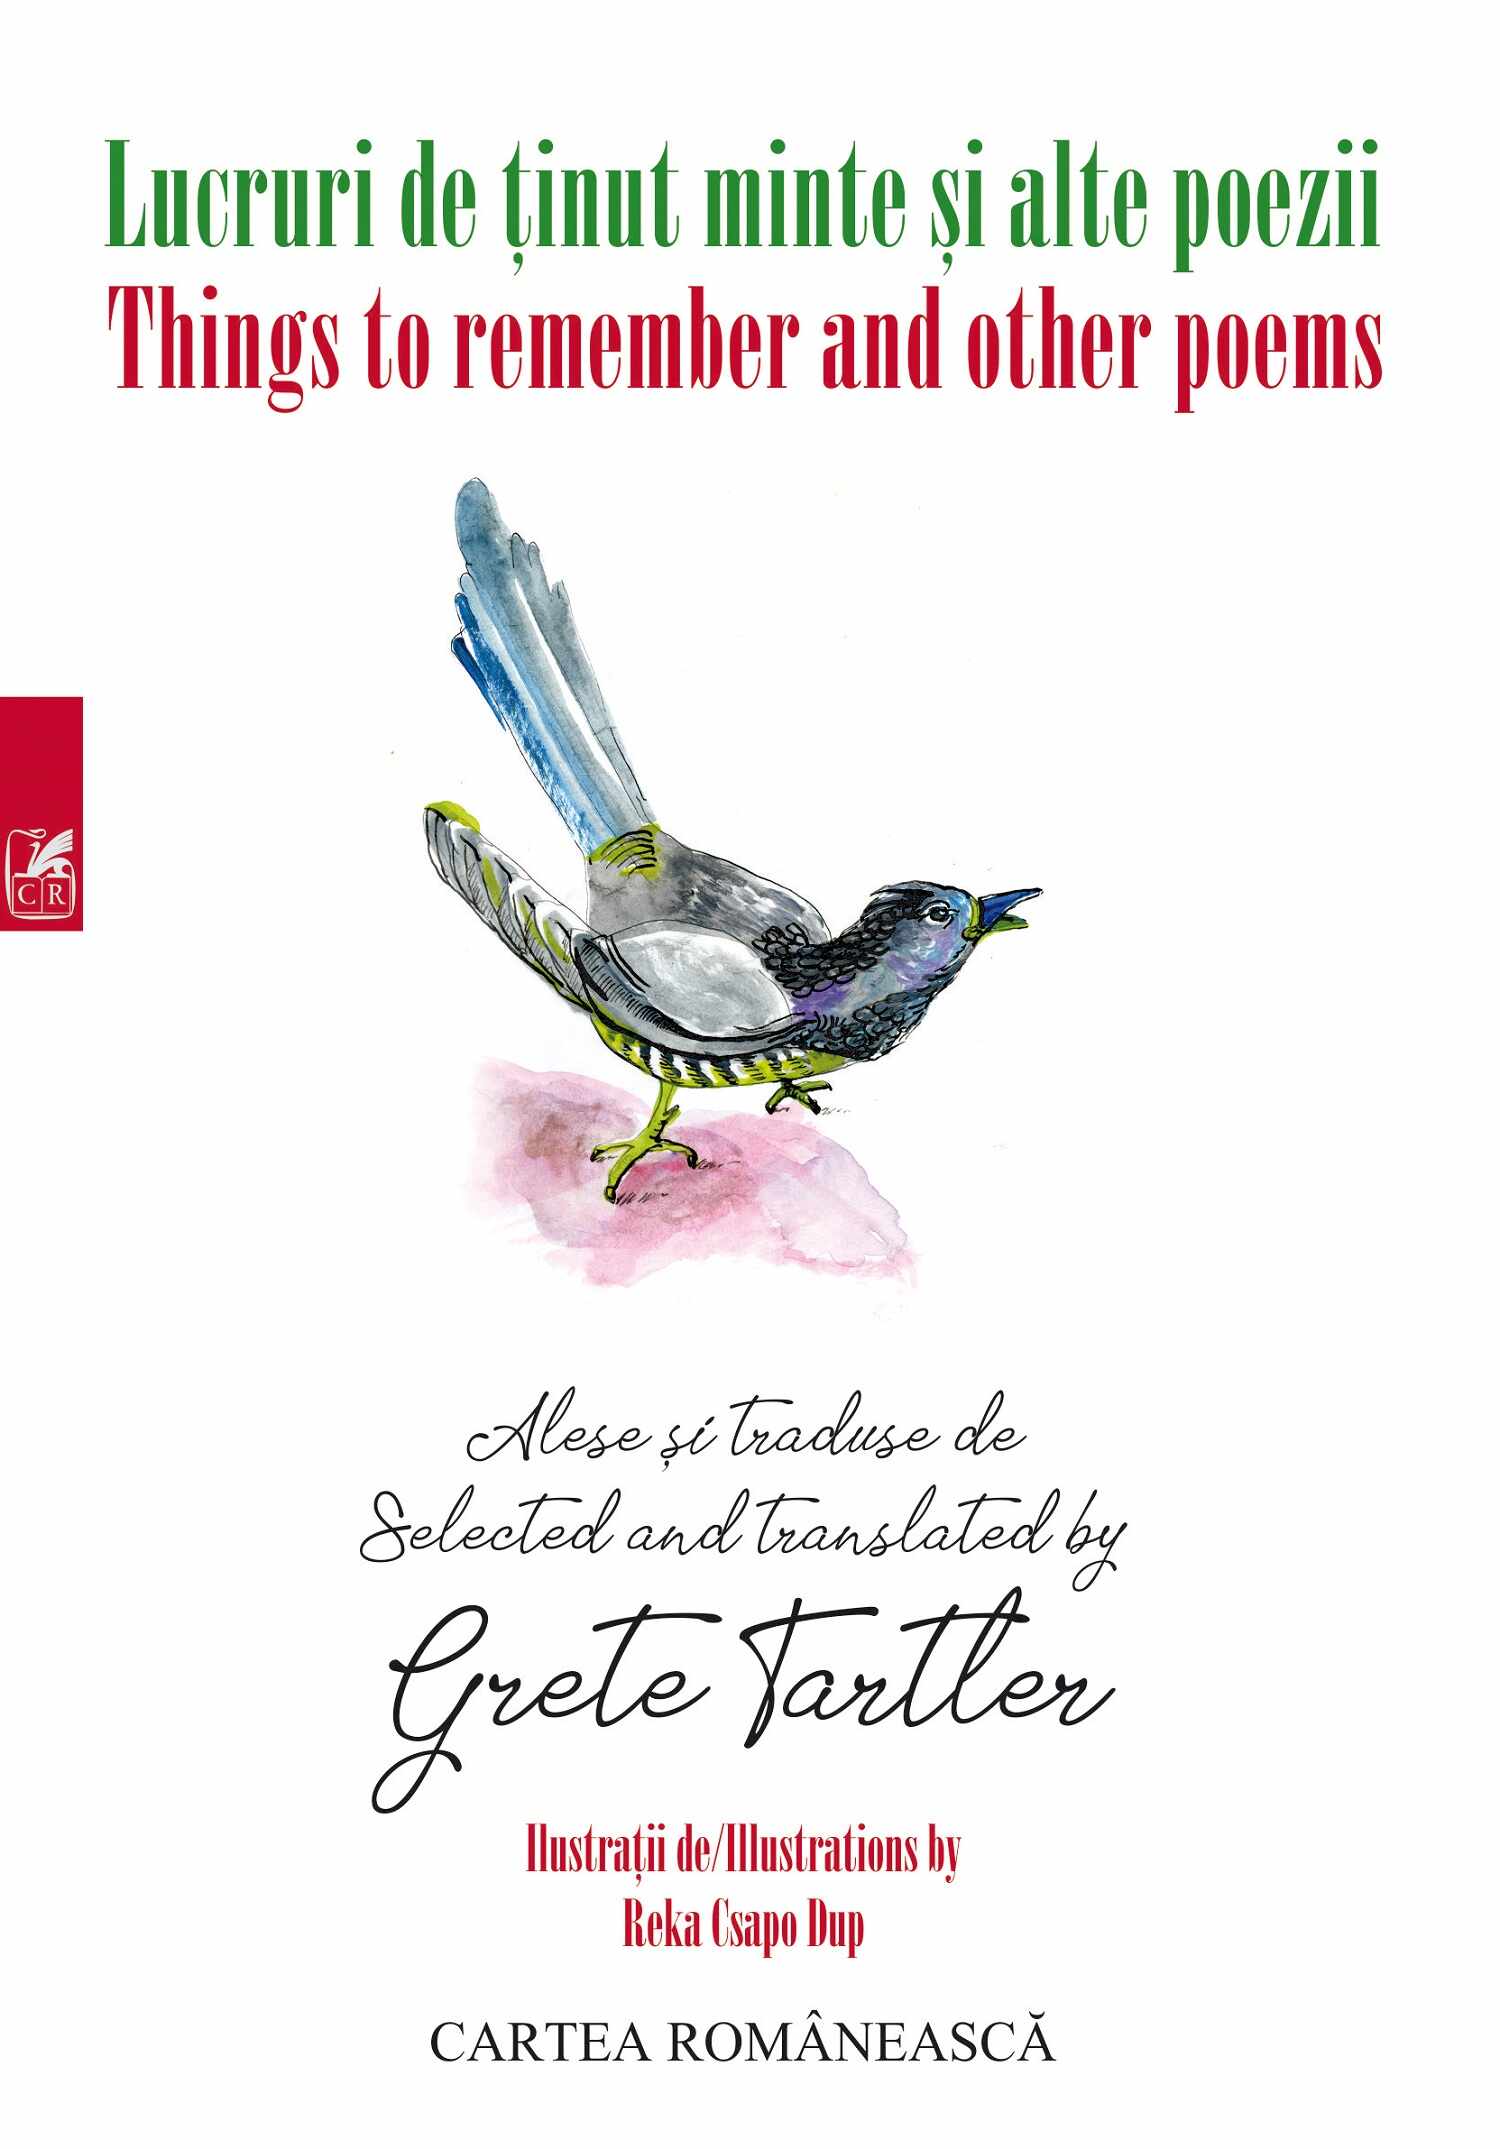 Lucruri de tinut minte si alte poeme / Things to remember and other poems | Grete Tartler